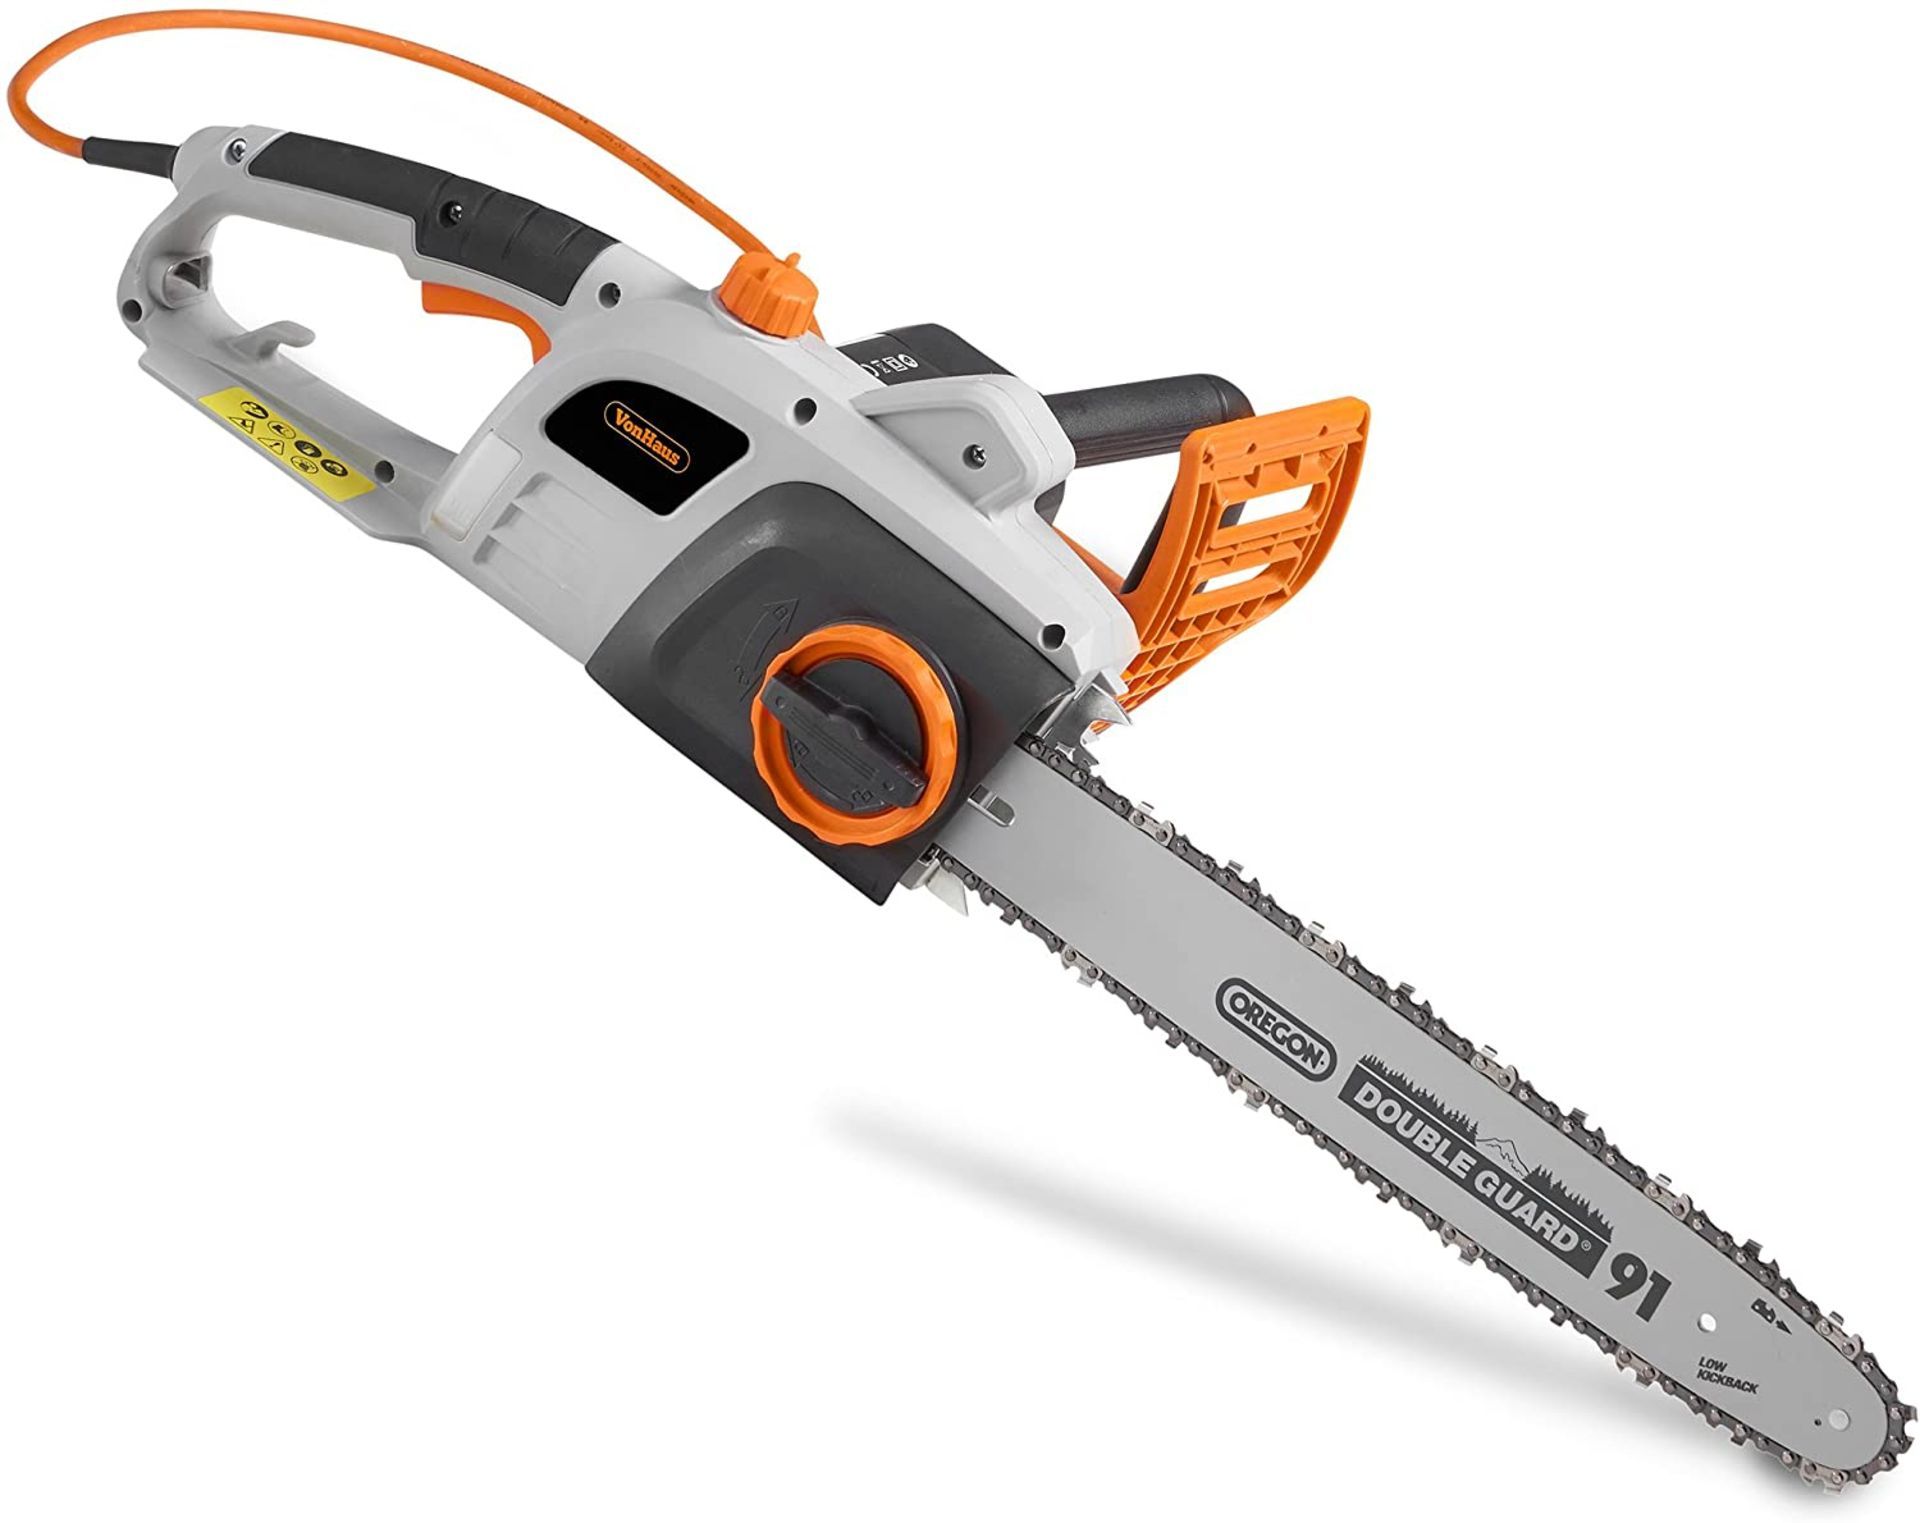 (GE64) 2200W Chainsaw With 16” Oregon Chain – Great For Carpentry & Gardening